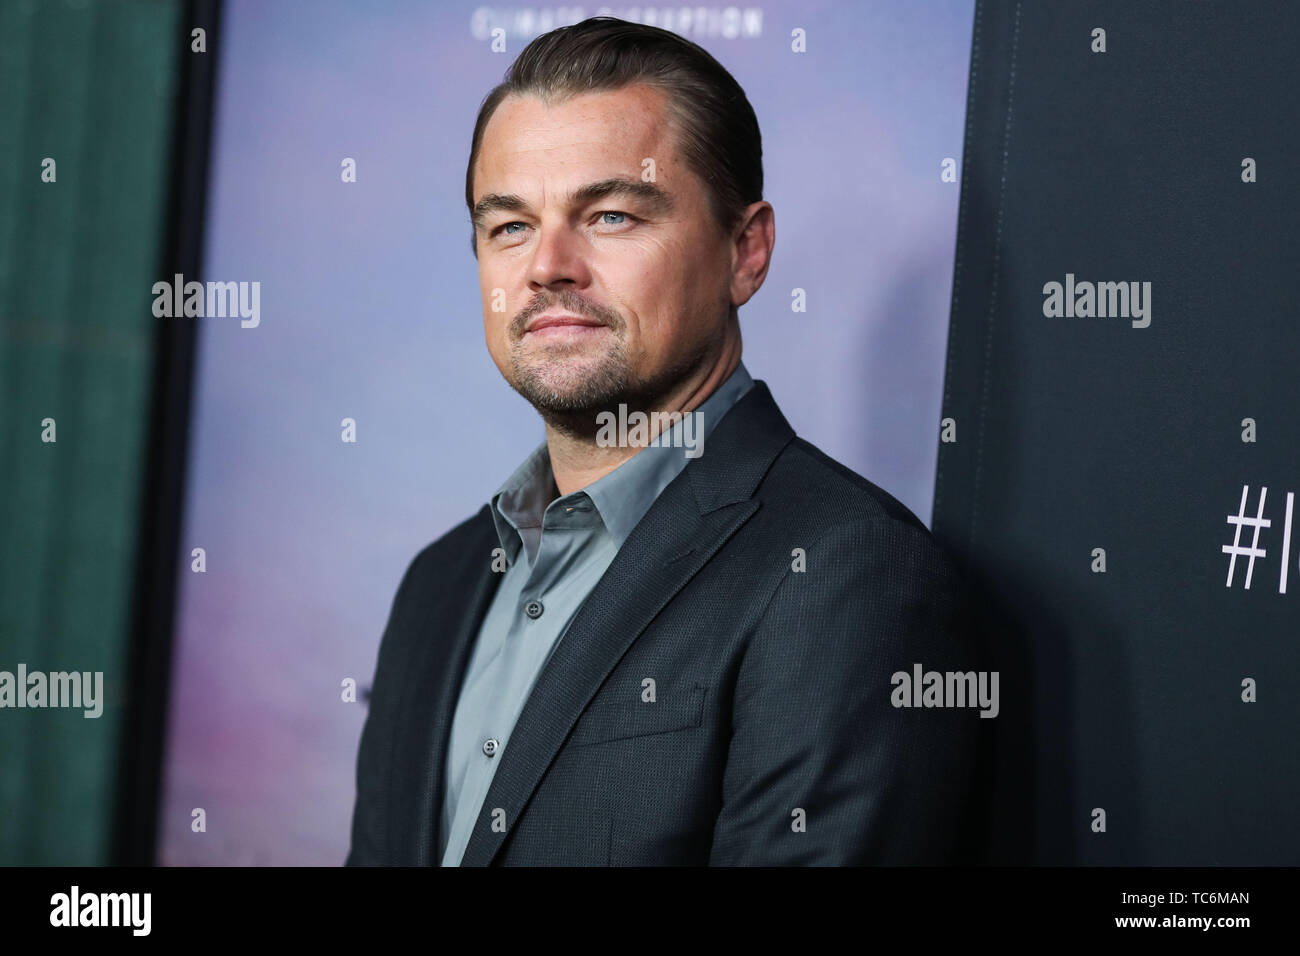 Los Angeles, United States. 05th June, 2019. LOS ANGELES, CALIFORNIA, USA - JUNE 05: Actor Leonardo DiCaprio arrives at the Los Angeles Premiere Of HBO's 'Ice On Fire' held at the Los Angeles County Museum of Art on June 5, 2019 in Los Angeles, California, United States. (Photo by Xavier Collin/Image Press Agency) Credit: Image Press Agency/Alamy Live News Stock Photo